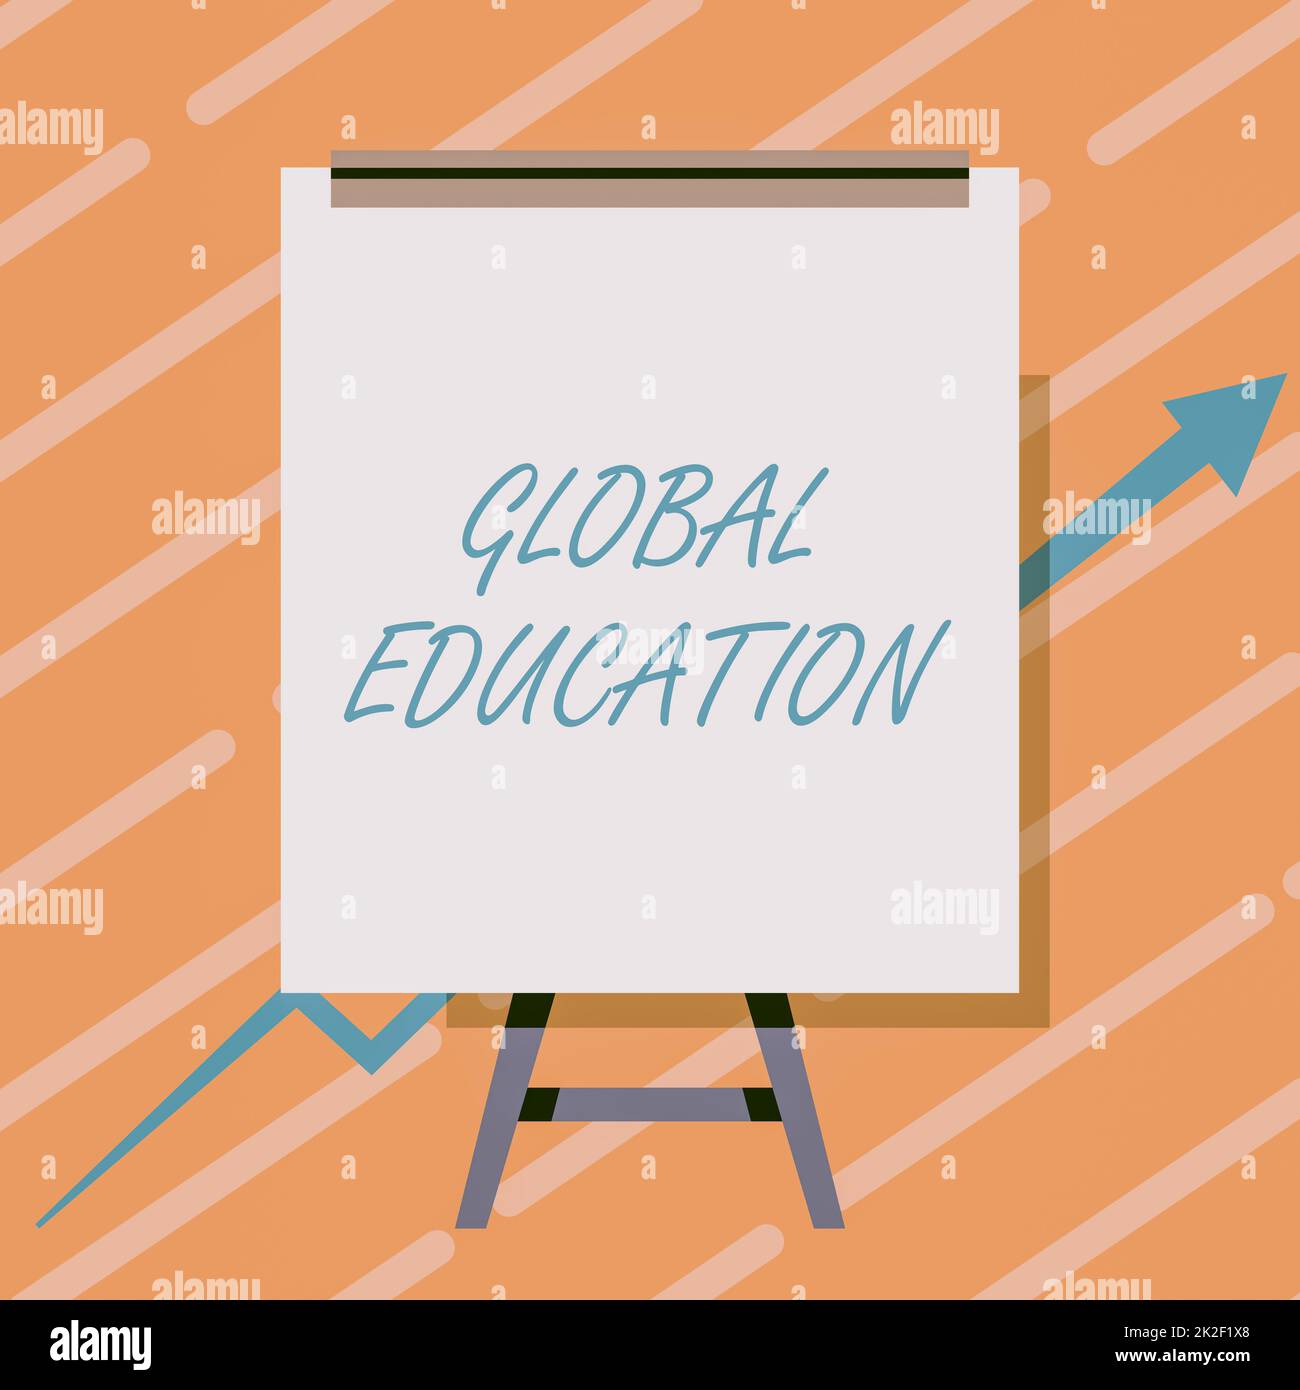 Conceptual caption Global Education. Business showcase ideas taught to enhance one s is perception of the world Whiteboard Drawing With Arrow Going Up Presenting Growing Graph. Stock Photo